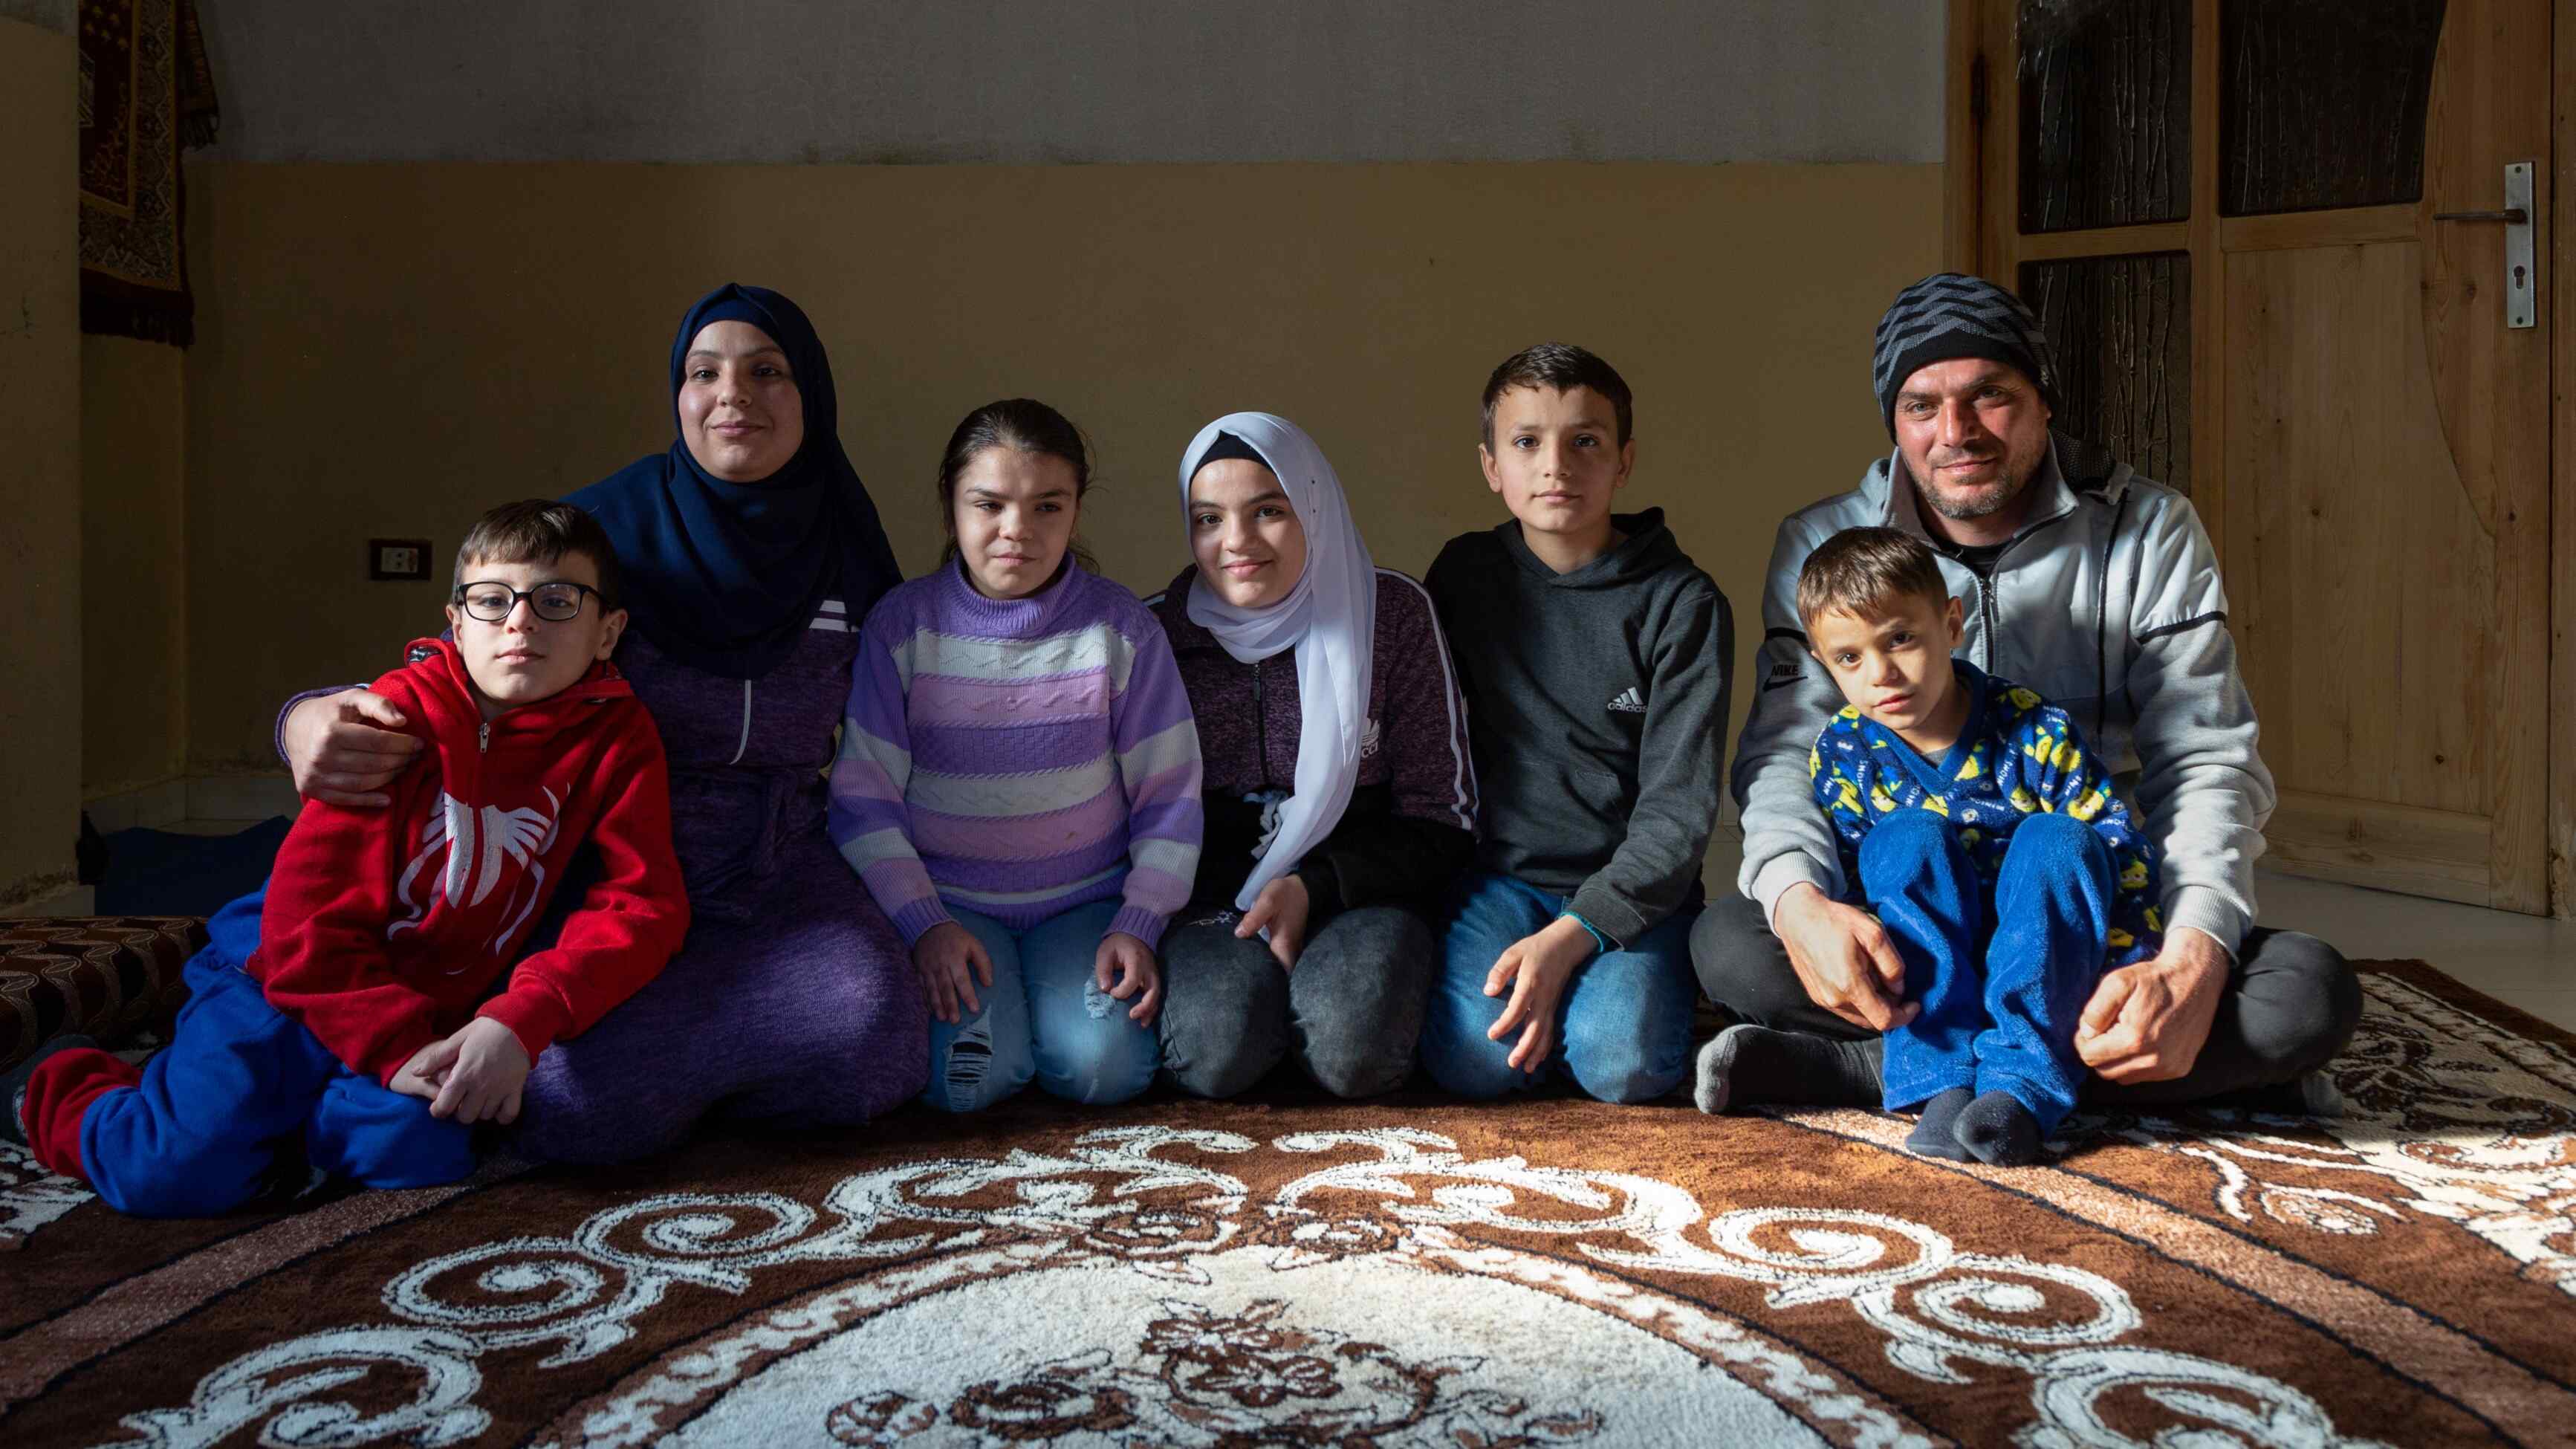 A family in Lebanon sit together in a living room and pose for a photo.